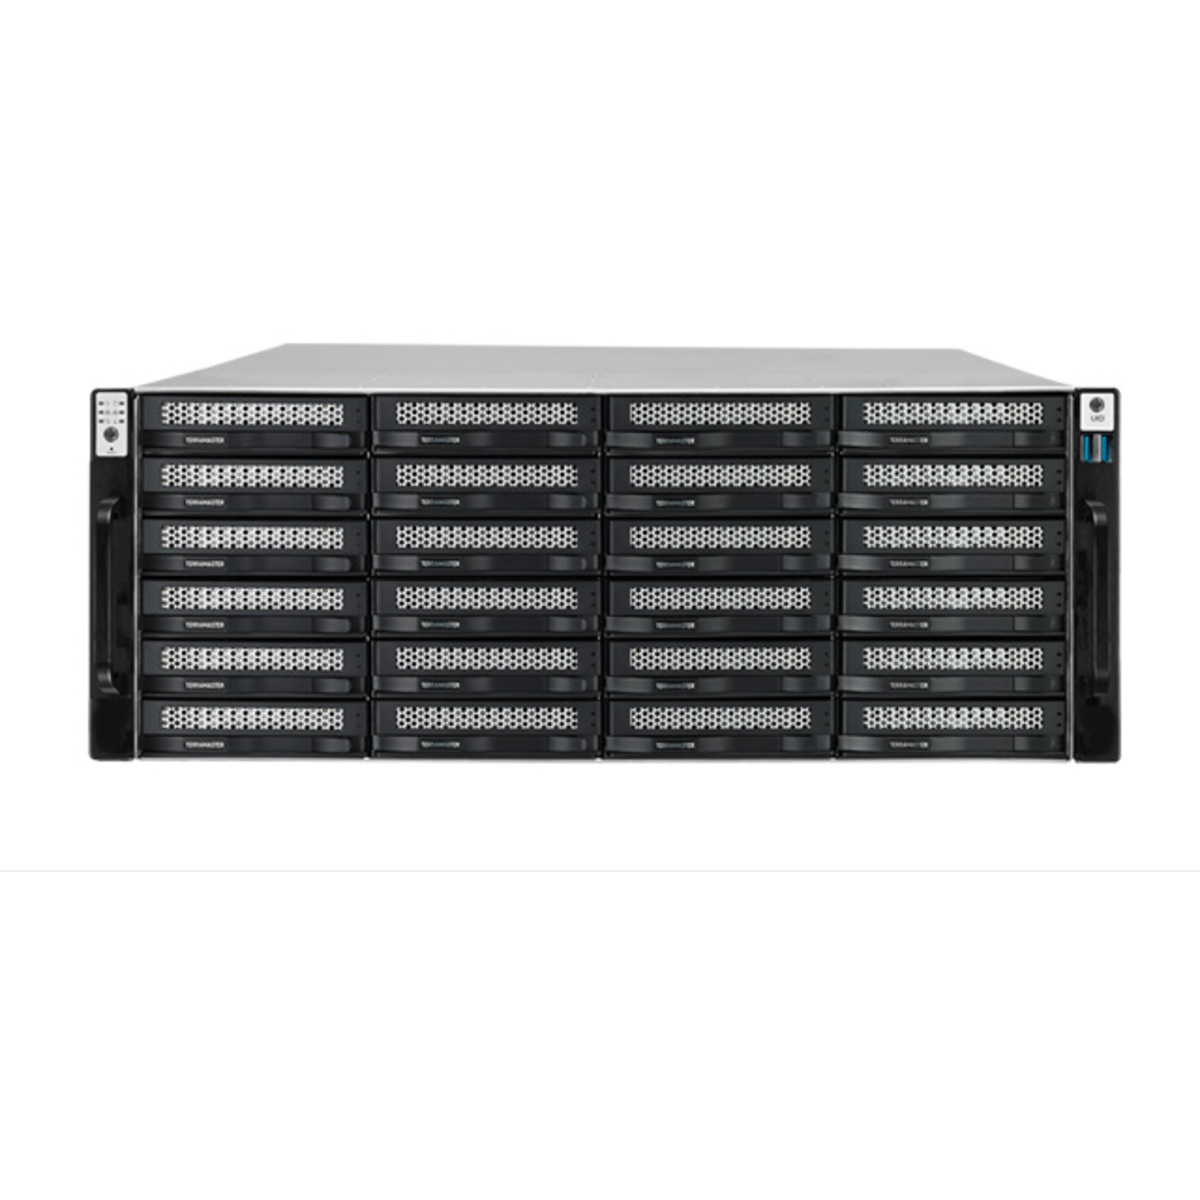 TerraMaster U24-722-2224 170tb 24-Bay RackMount Large Business / Enterprise NAS - Network Attached Storage Device 17x10tb Western Digital Red Plus WD101EFBX 3.5 7200rpm SATA 6Gb/s HDD NAS Class Drives Installed - Burn-In Tested U24-722-2224